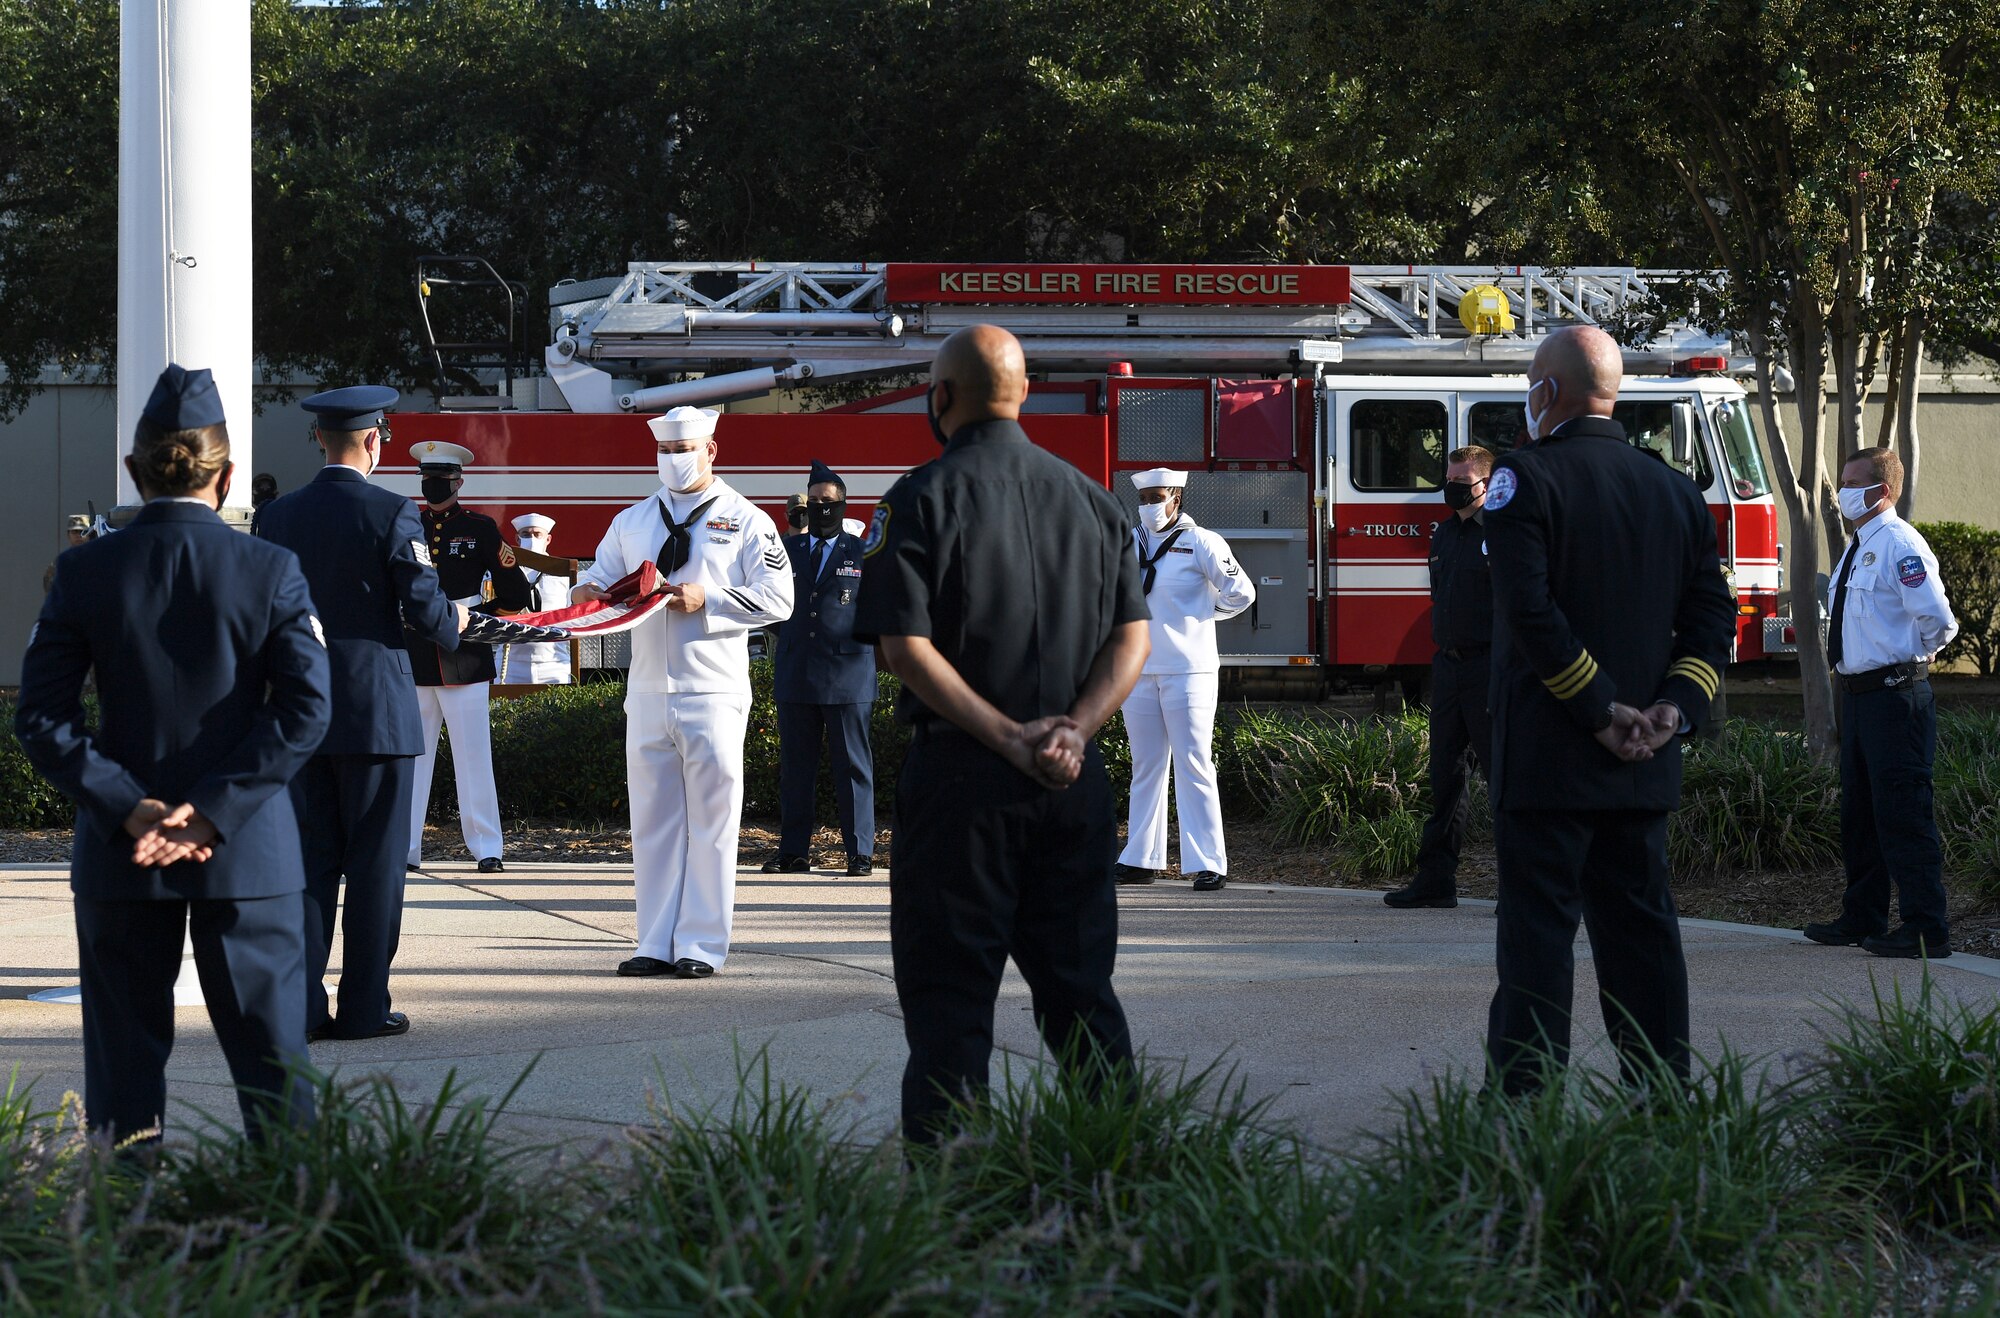 Keesler Airmen, Sailors and Marines participate in a 9/11 memorial ceremony hosted by the Center for Naval Aviation Technical Training Unit Keesler in front of the 81st Training Wing headquarters building at Keesler Air Force Base, Mississippi, Sept. 11, 2020. The event honored those who lost their lives during the 9/11 attacks. (U.S. Air Force photo by Kemberly Groue)